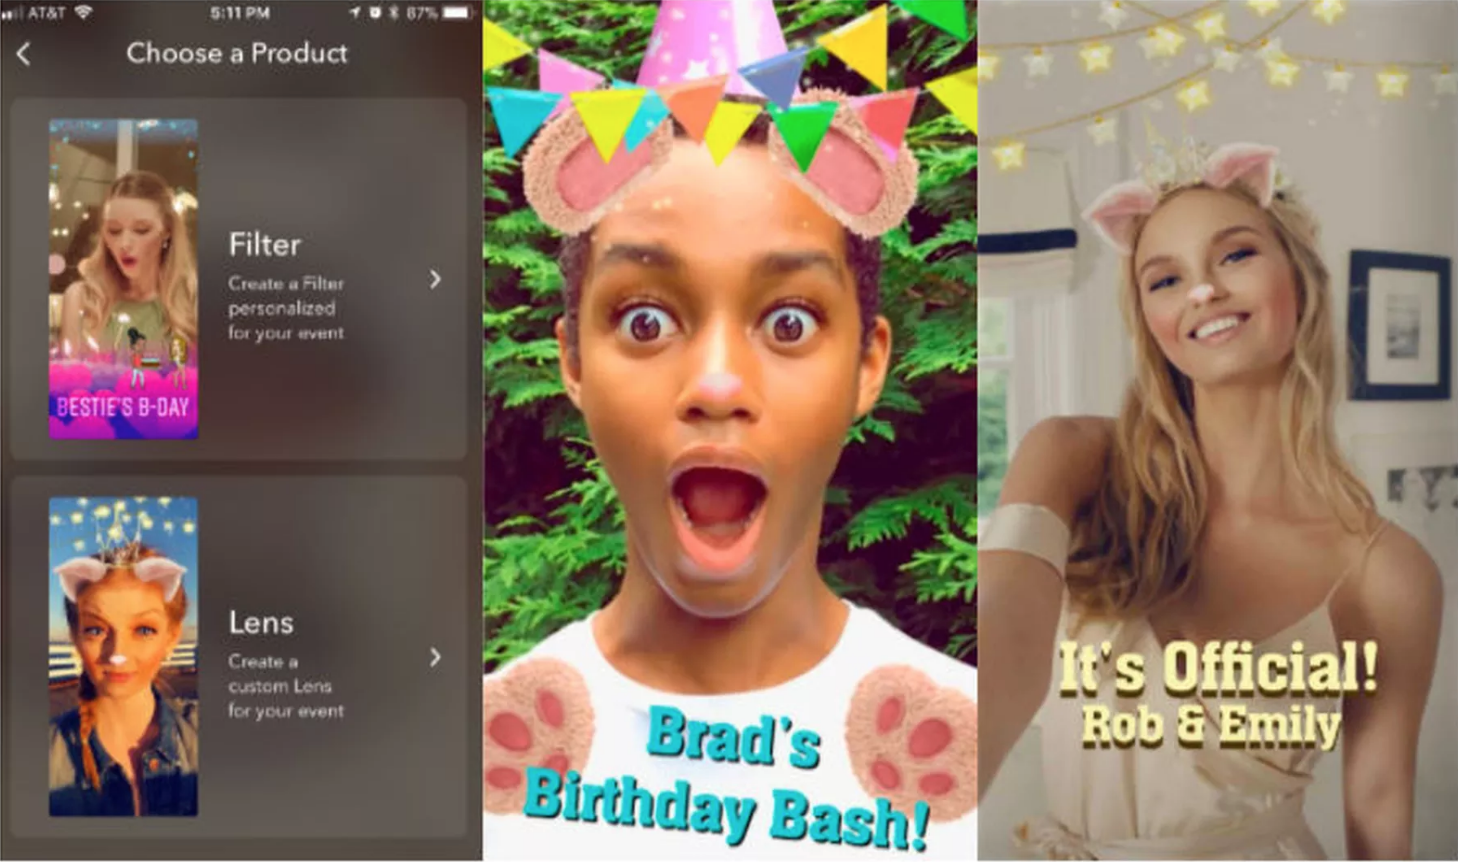 Snapchat personalized Lenses